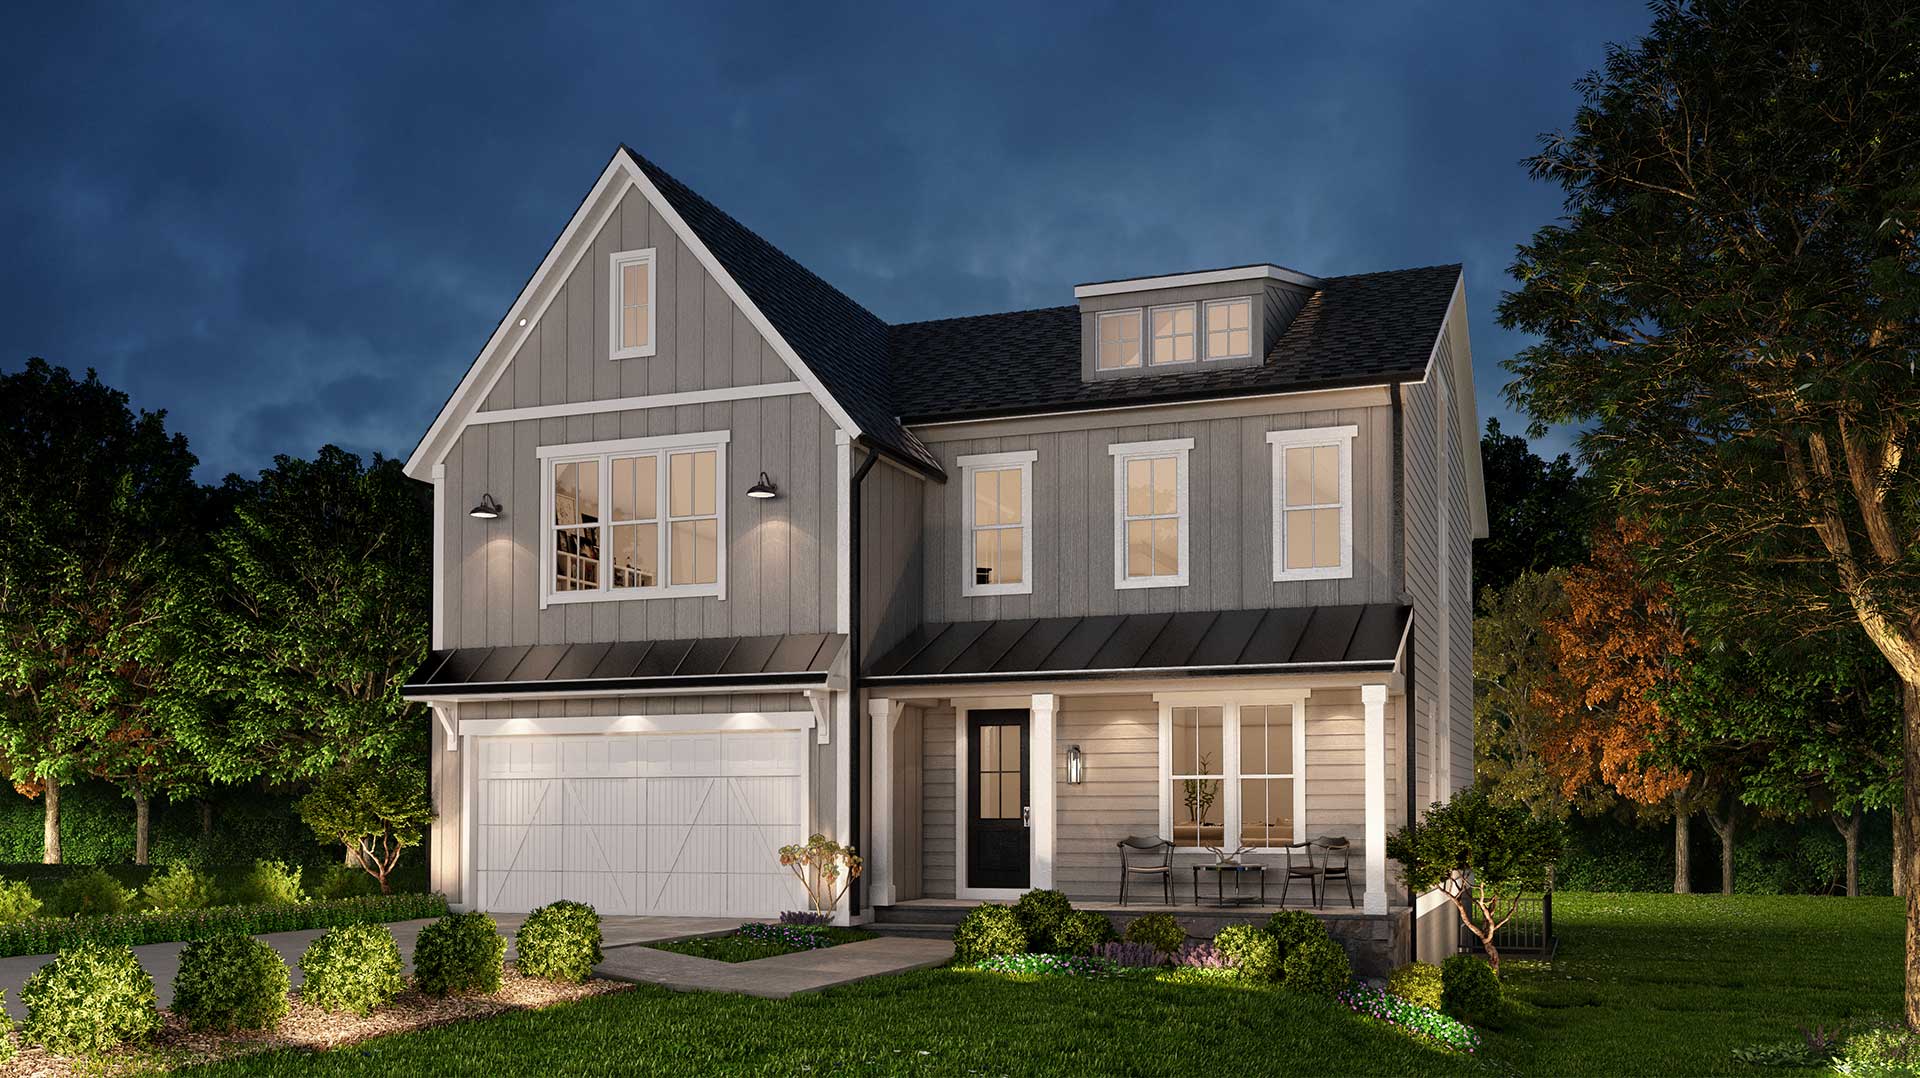 A rendering of a modern farmhouse style home in grey board and batten with white window and trim.